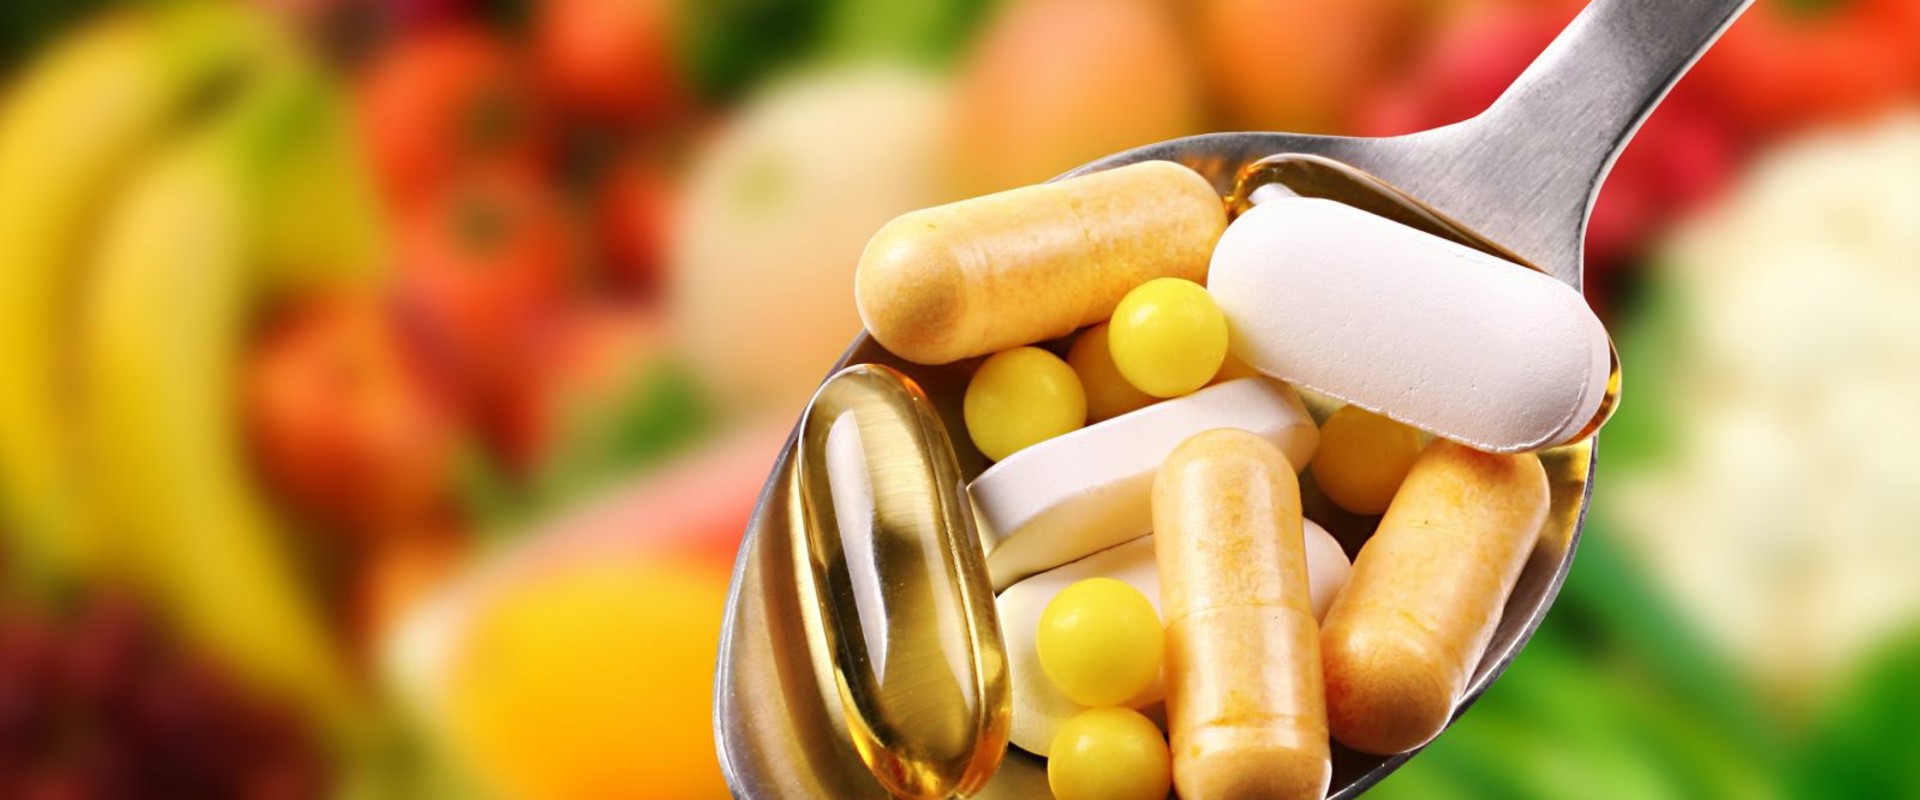 Are vitamin supplements fda approved?